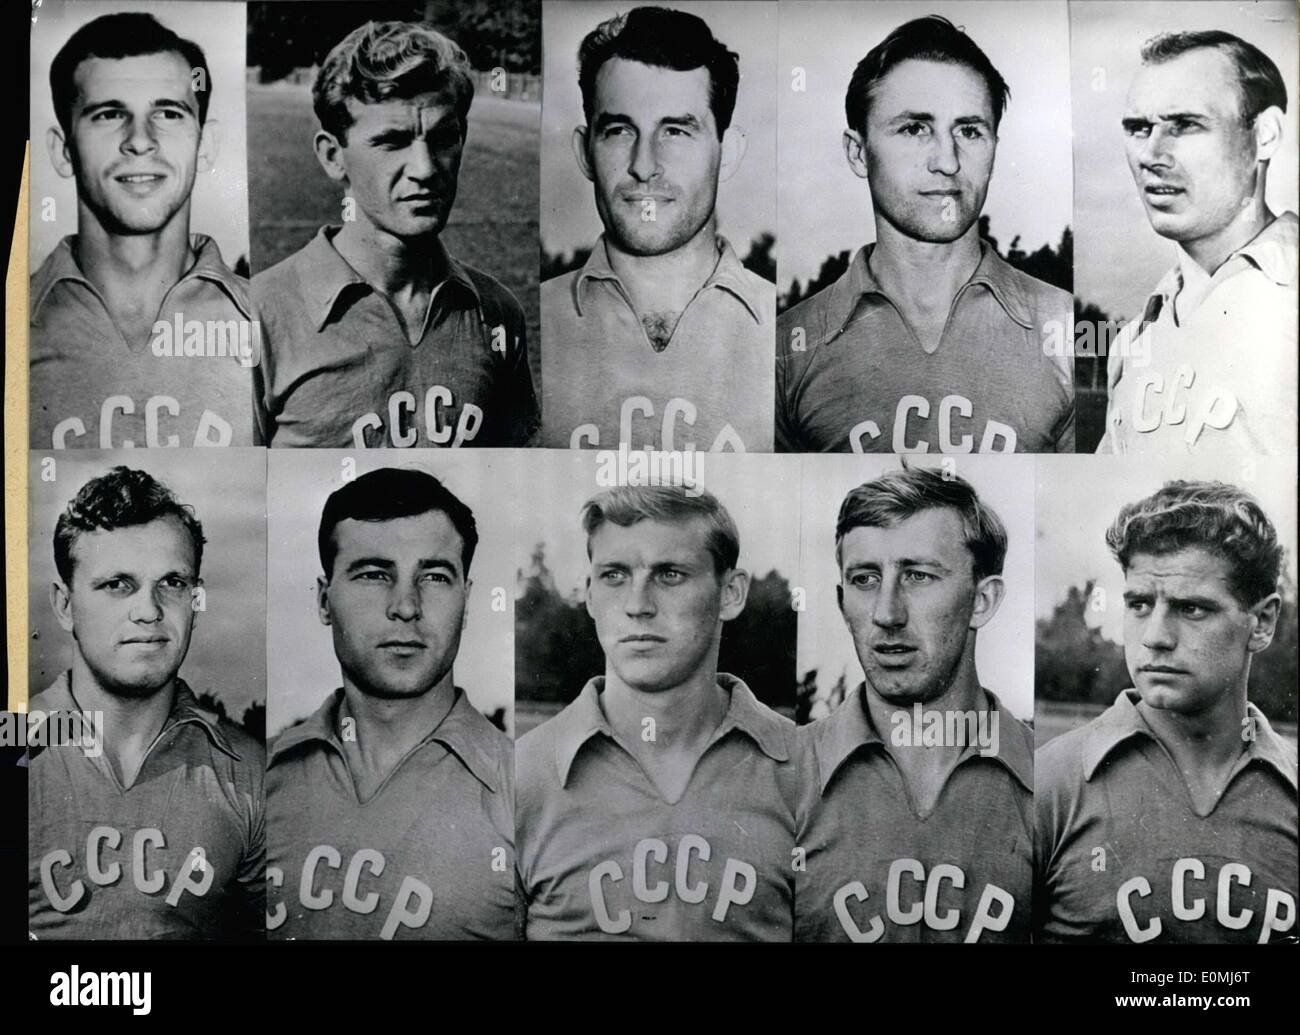 Aug. 19, 1955 - Above from left to right: Michail Ogonkow, 23 years old, Spartak Moscow. Jurij Kuanezow. Sergeij Salnikow, 29 years old, Dynamo Moscow. Alexeij Paramonow, 28 years old, Spartak Moscow. Mikelai Paschkin. Bottom from left to right: Boris Tatuschkin, 20 years old, Spartak Moscow. Vladimir Schabrow, Dynamo Moscow. Anatolij Maslenkin Igor Netto, 26 years old, Spartak Moscow, and Team Captain. Jurij Woinow. Stock Photo